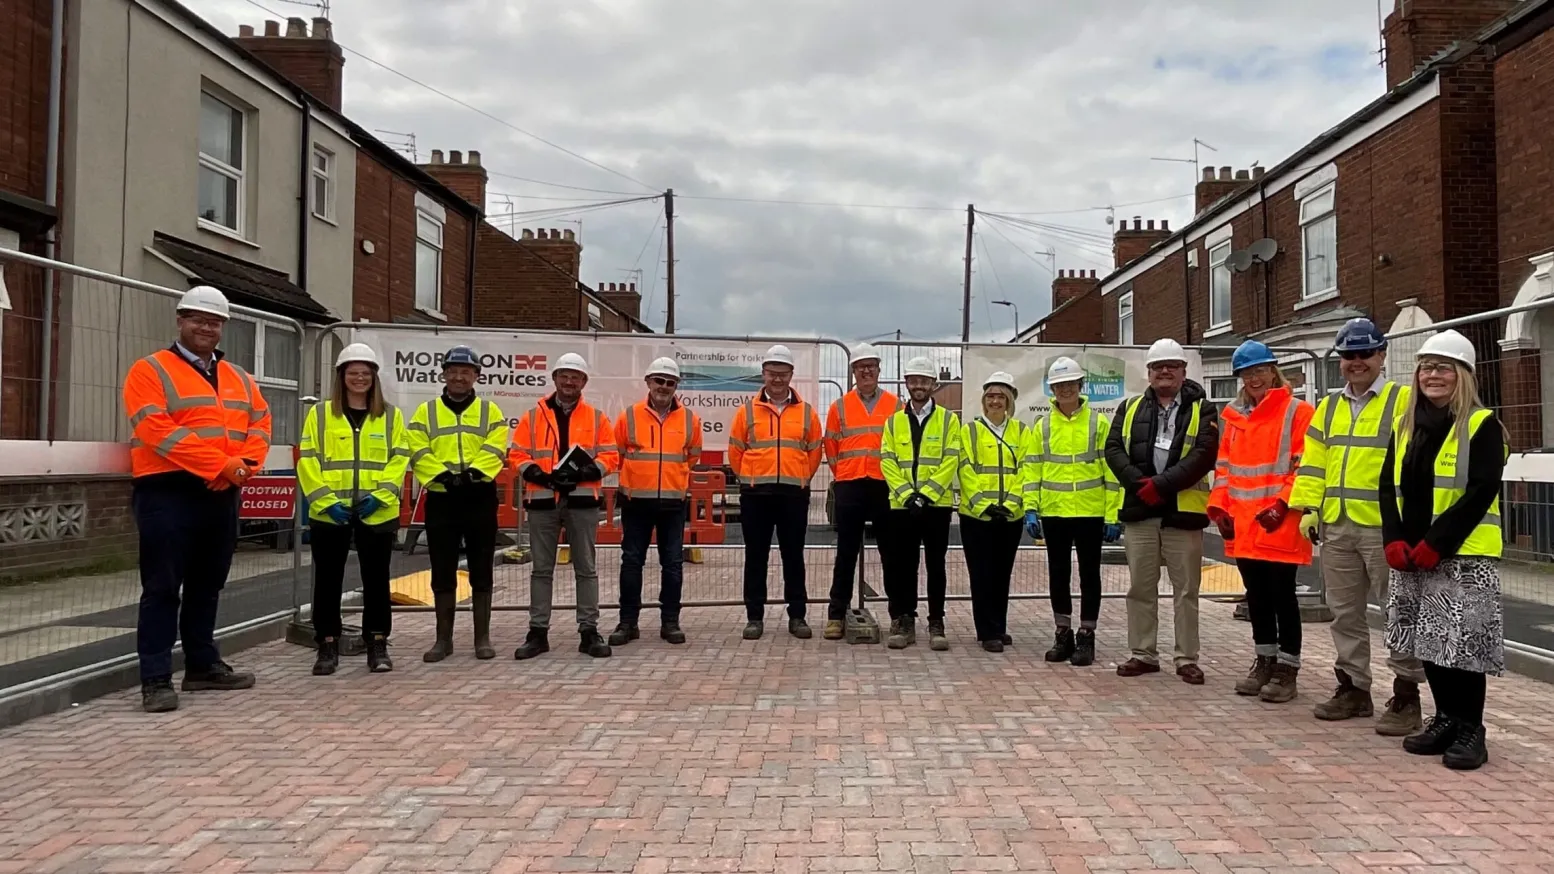 A group of people in high viz jackets and hardhats stand on the newly laid permeable street paving